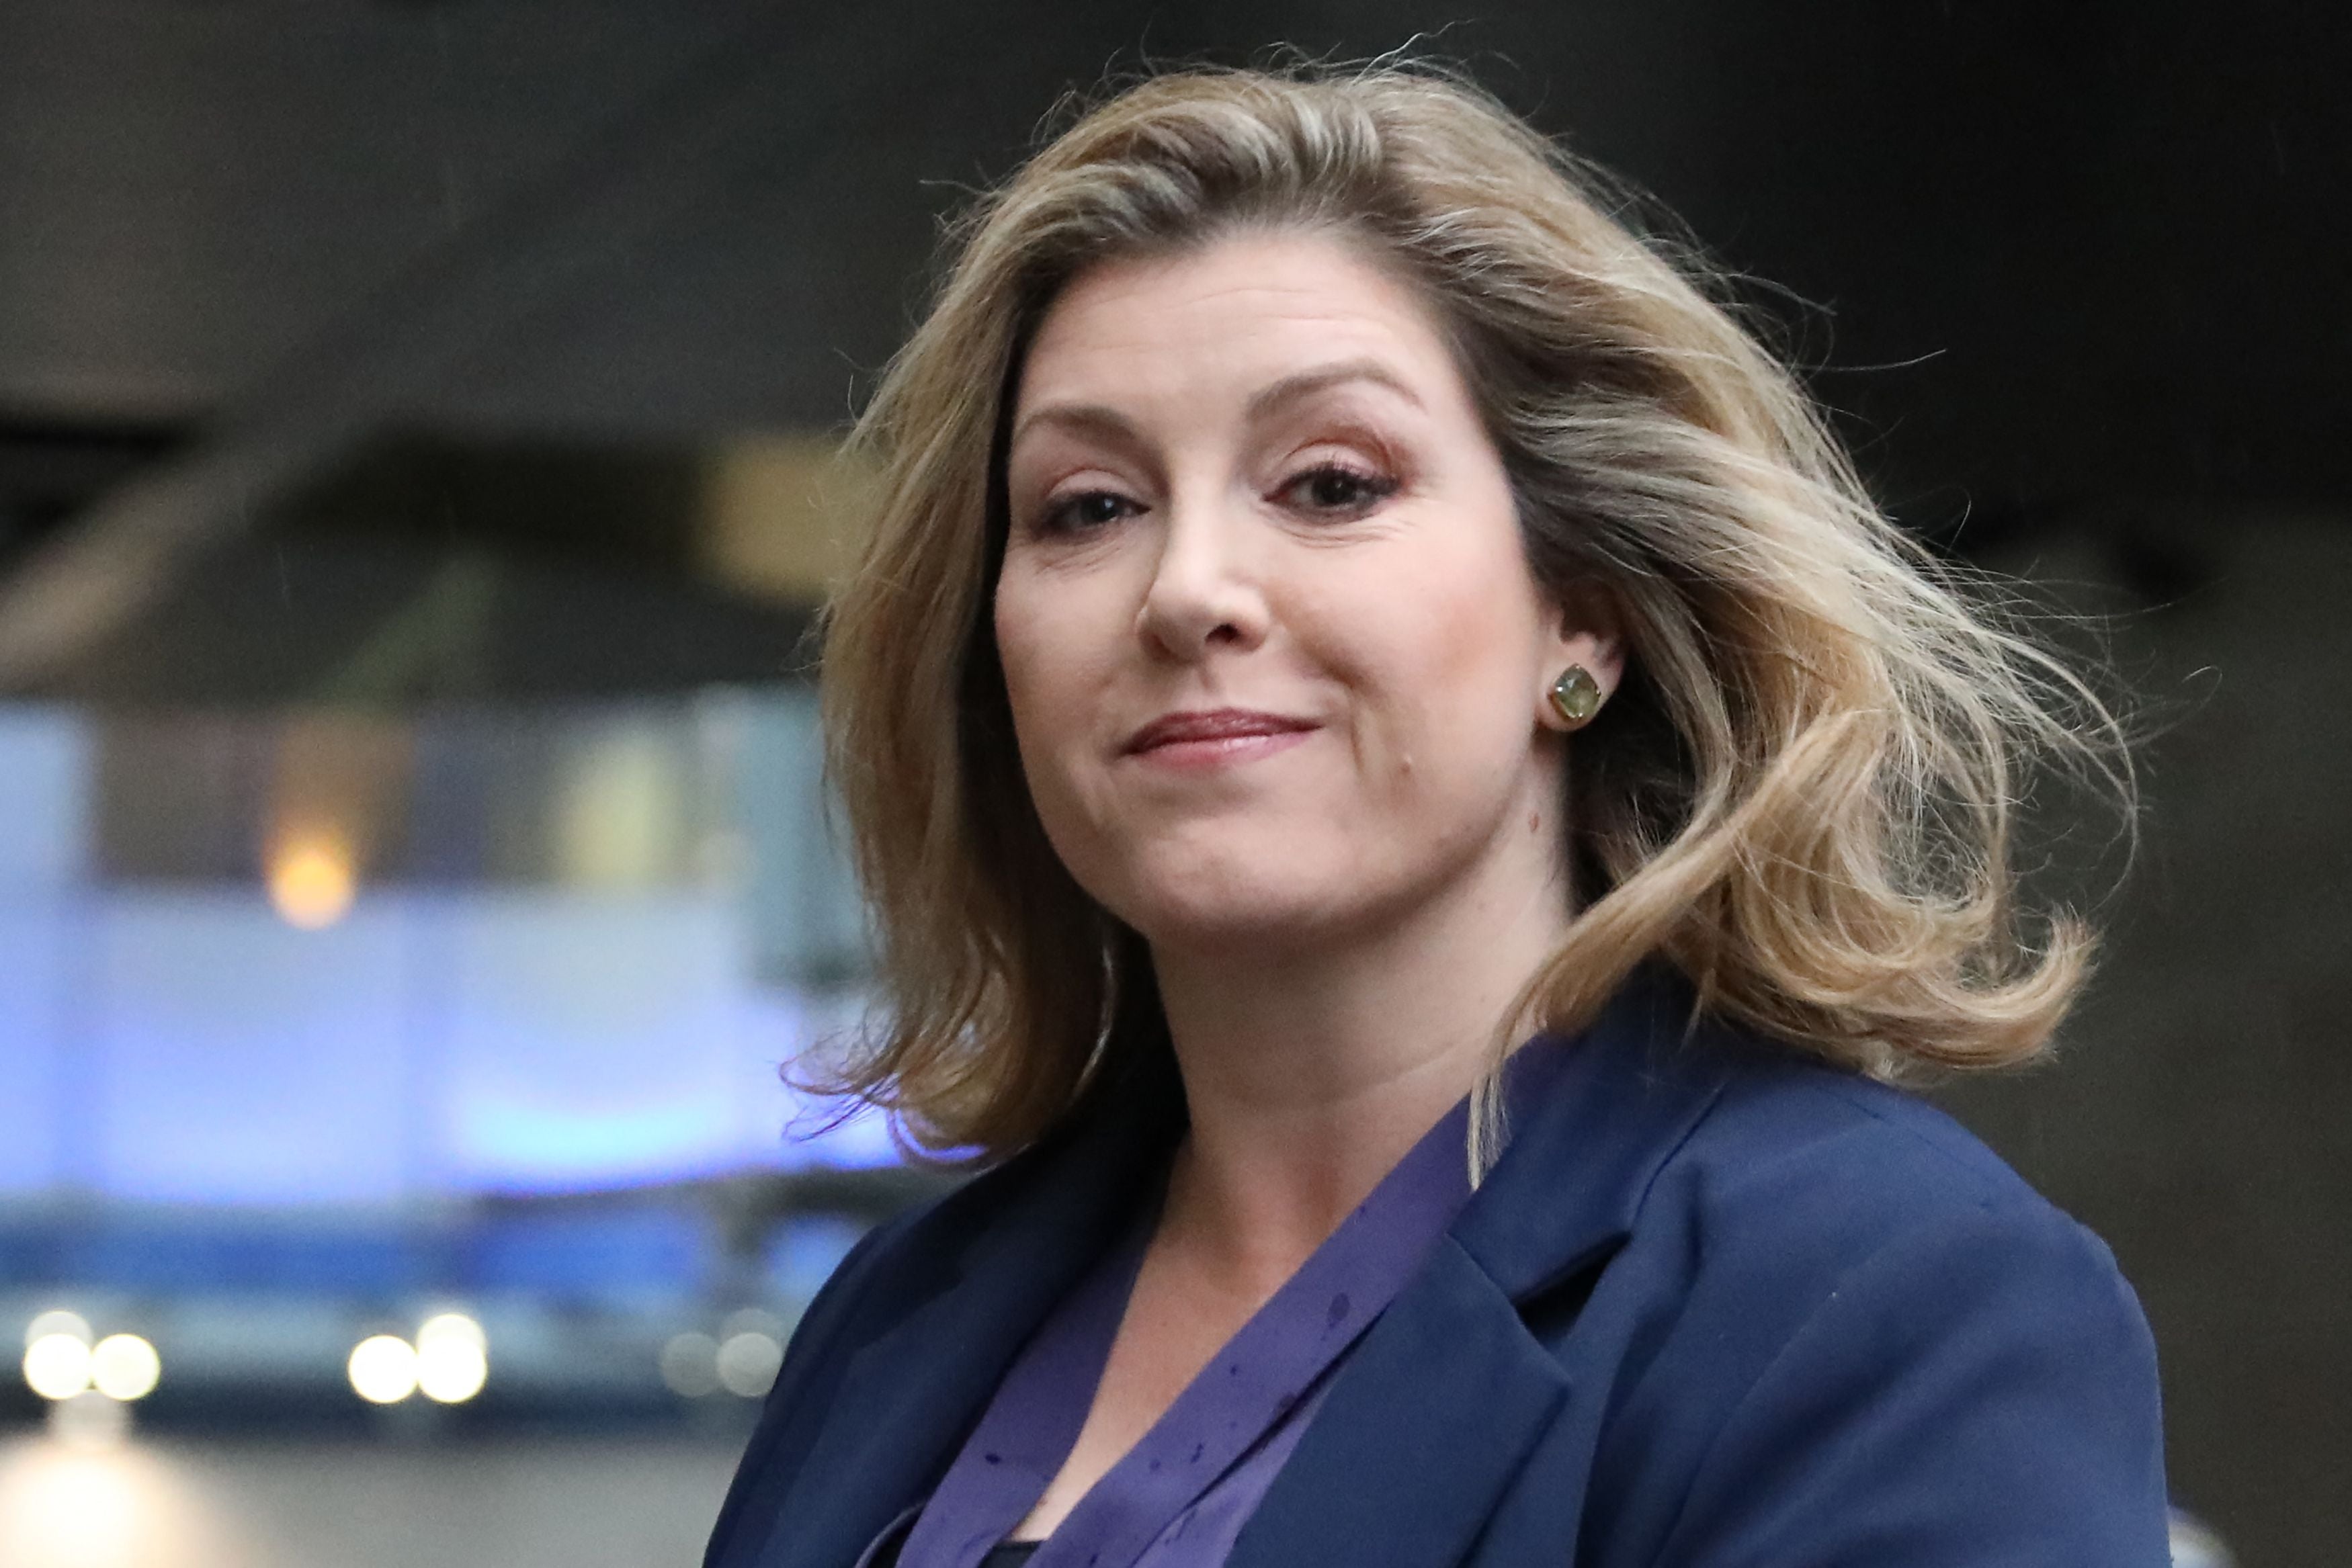 Penny Mordaunt hopes to reach 100 backers